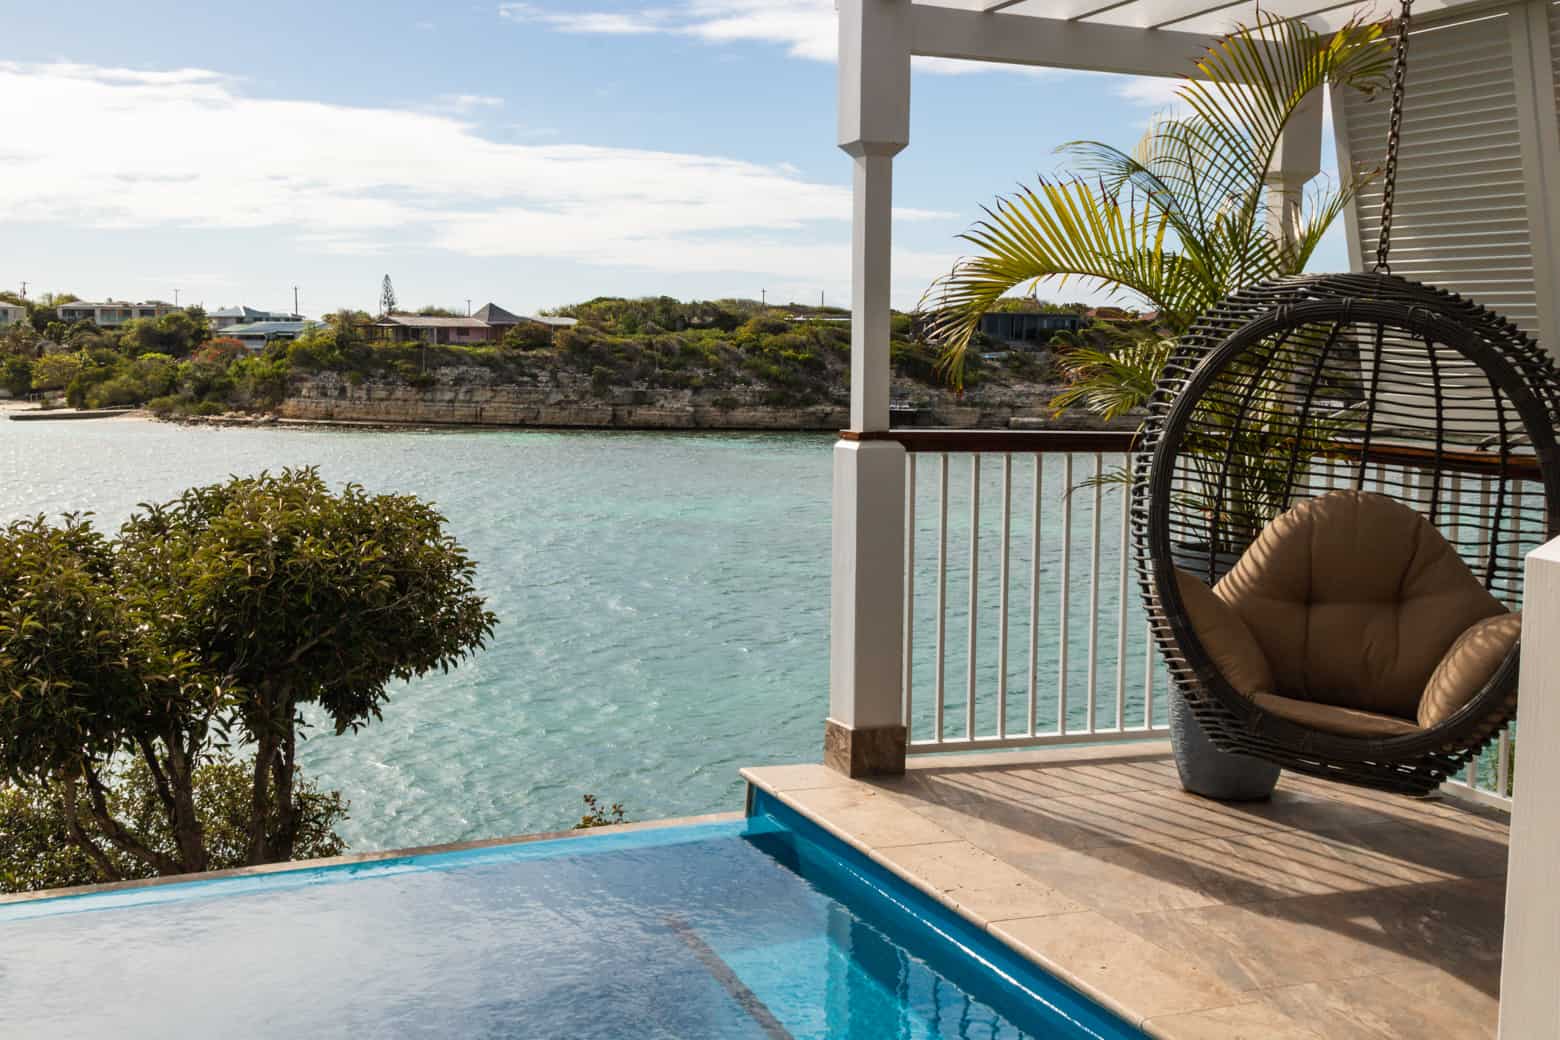 Private pool and hammock chair overlooking the oceans at Hammock Cove's all inclusive adult-only Antigua resort.